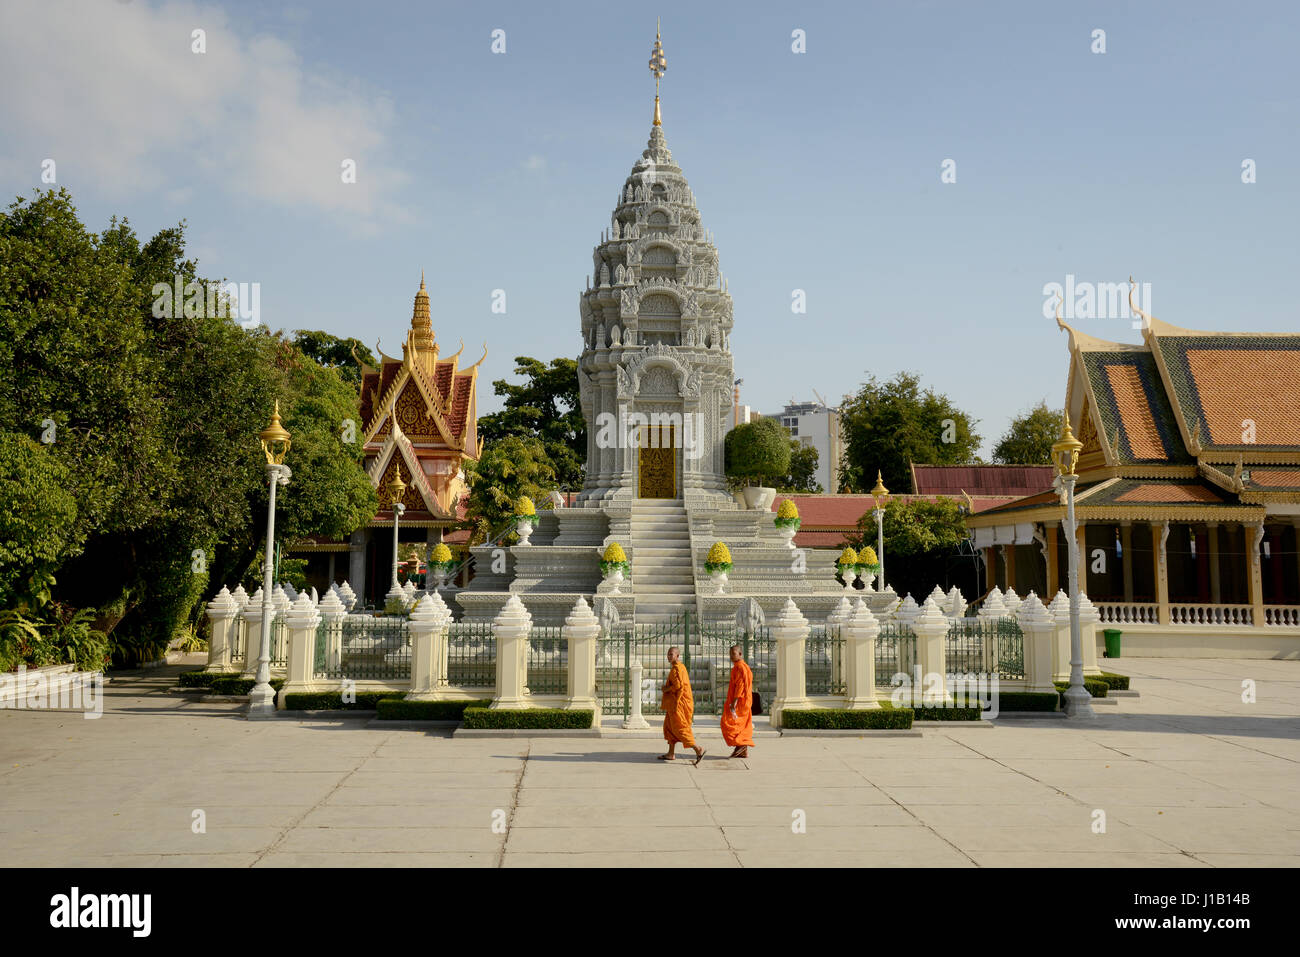 Stupa (Buddhist shrine) of Princess Kantha Bopha in the grounds of the Royal Palace in Phnom Penh, Cambodia. Stock Photo